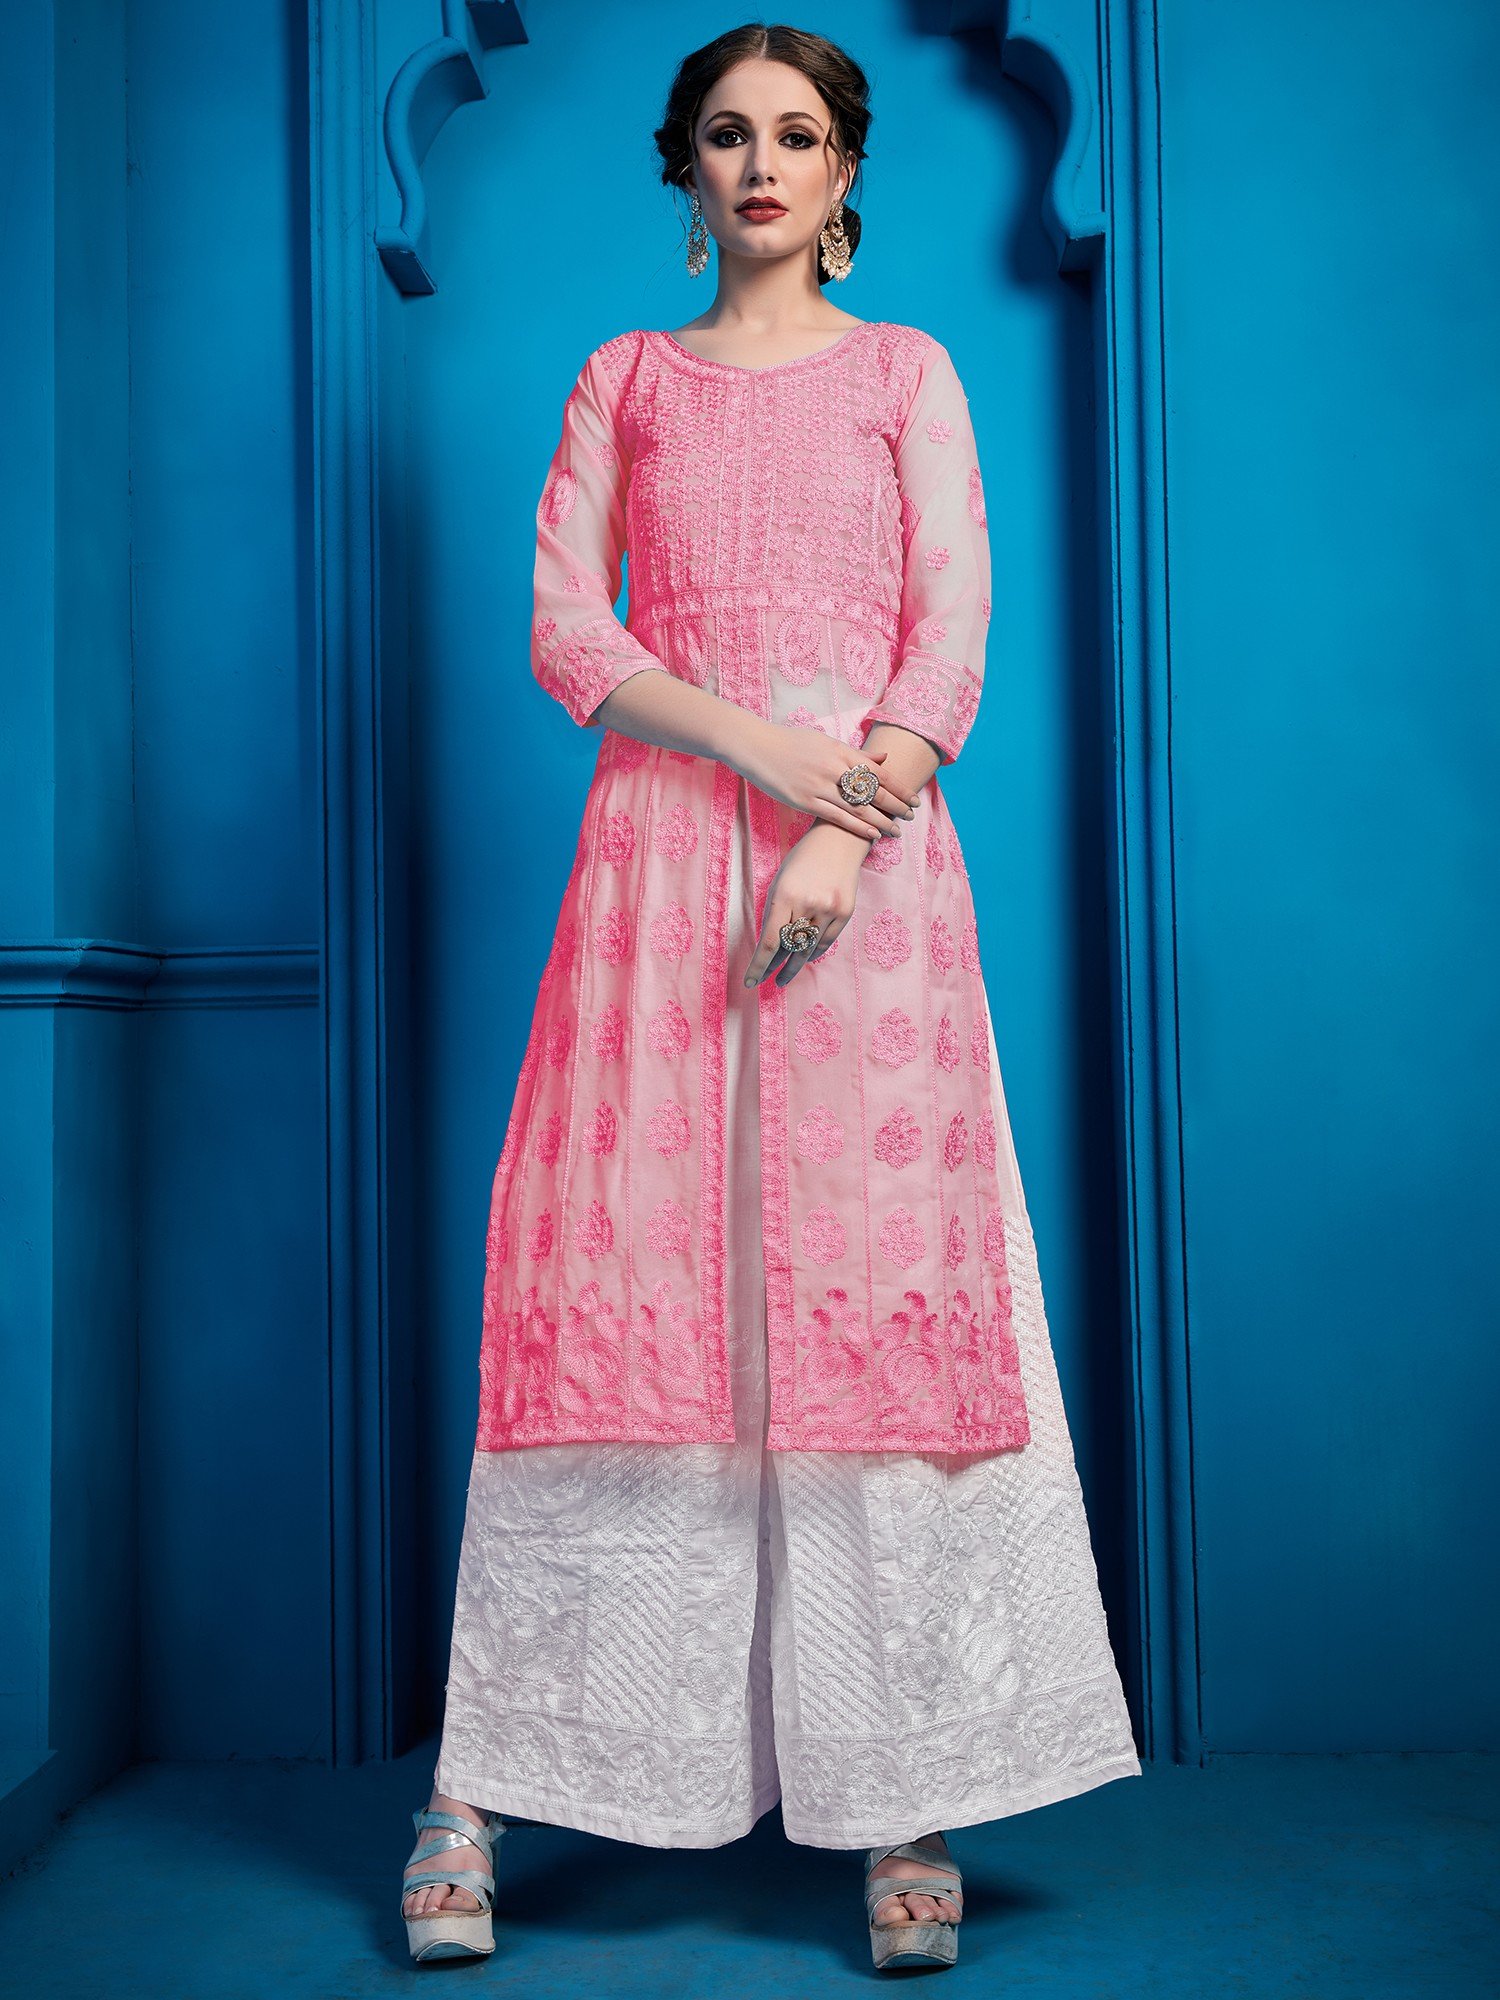 Off White Georgette Kameez With Palazzo Pant 61027 | Fashion, Indian  fashion trends, Simple dresses